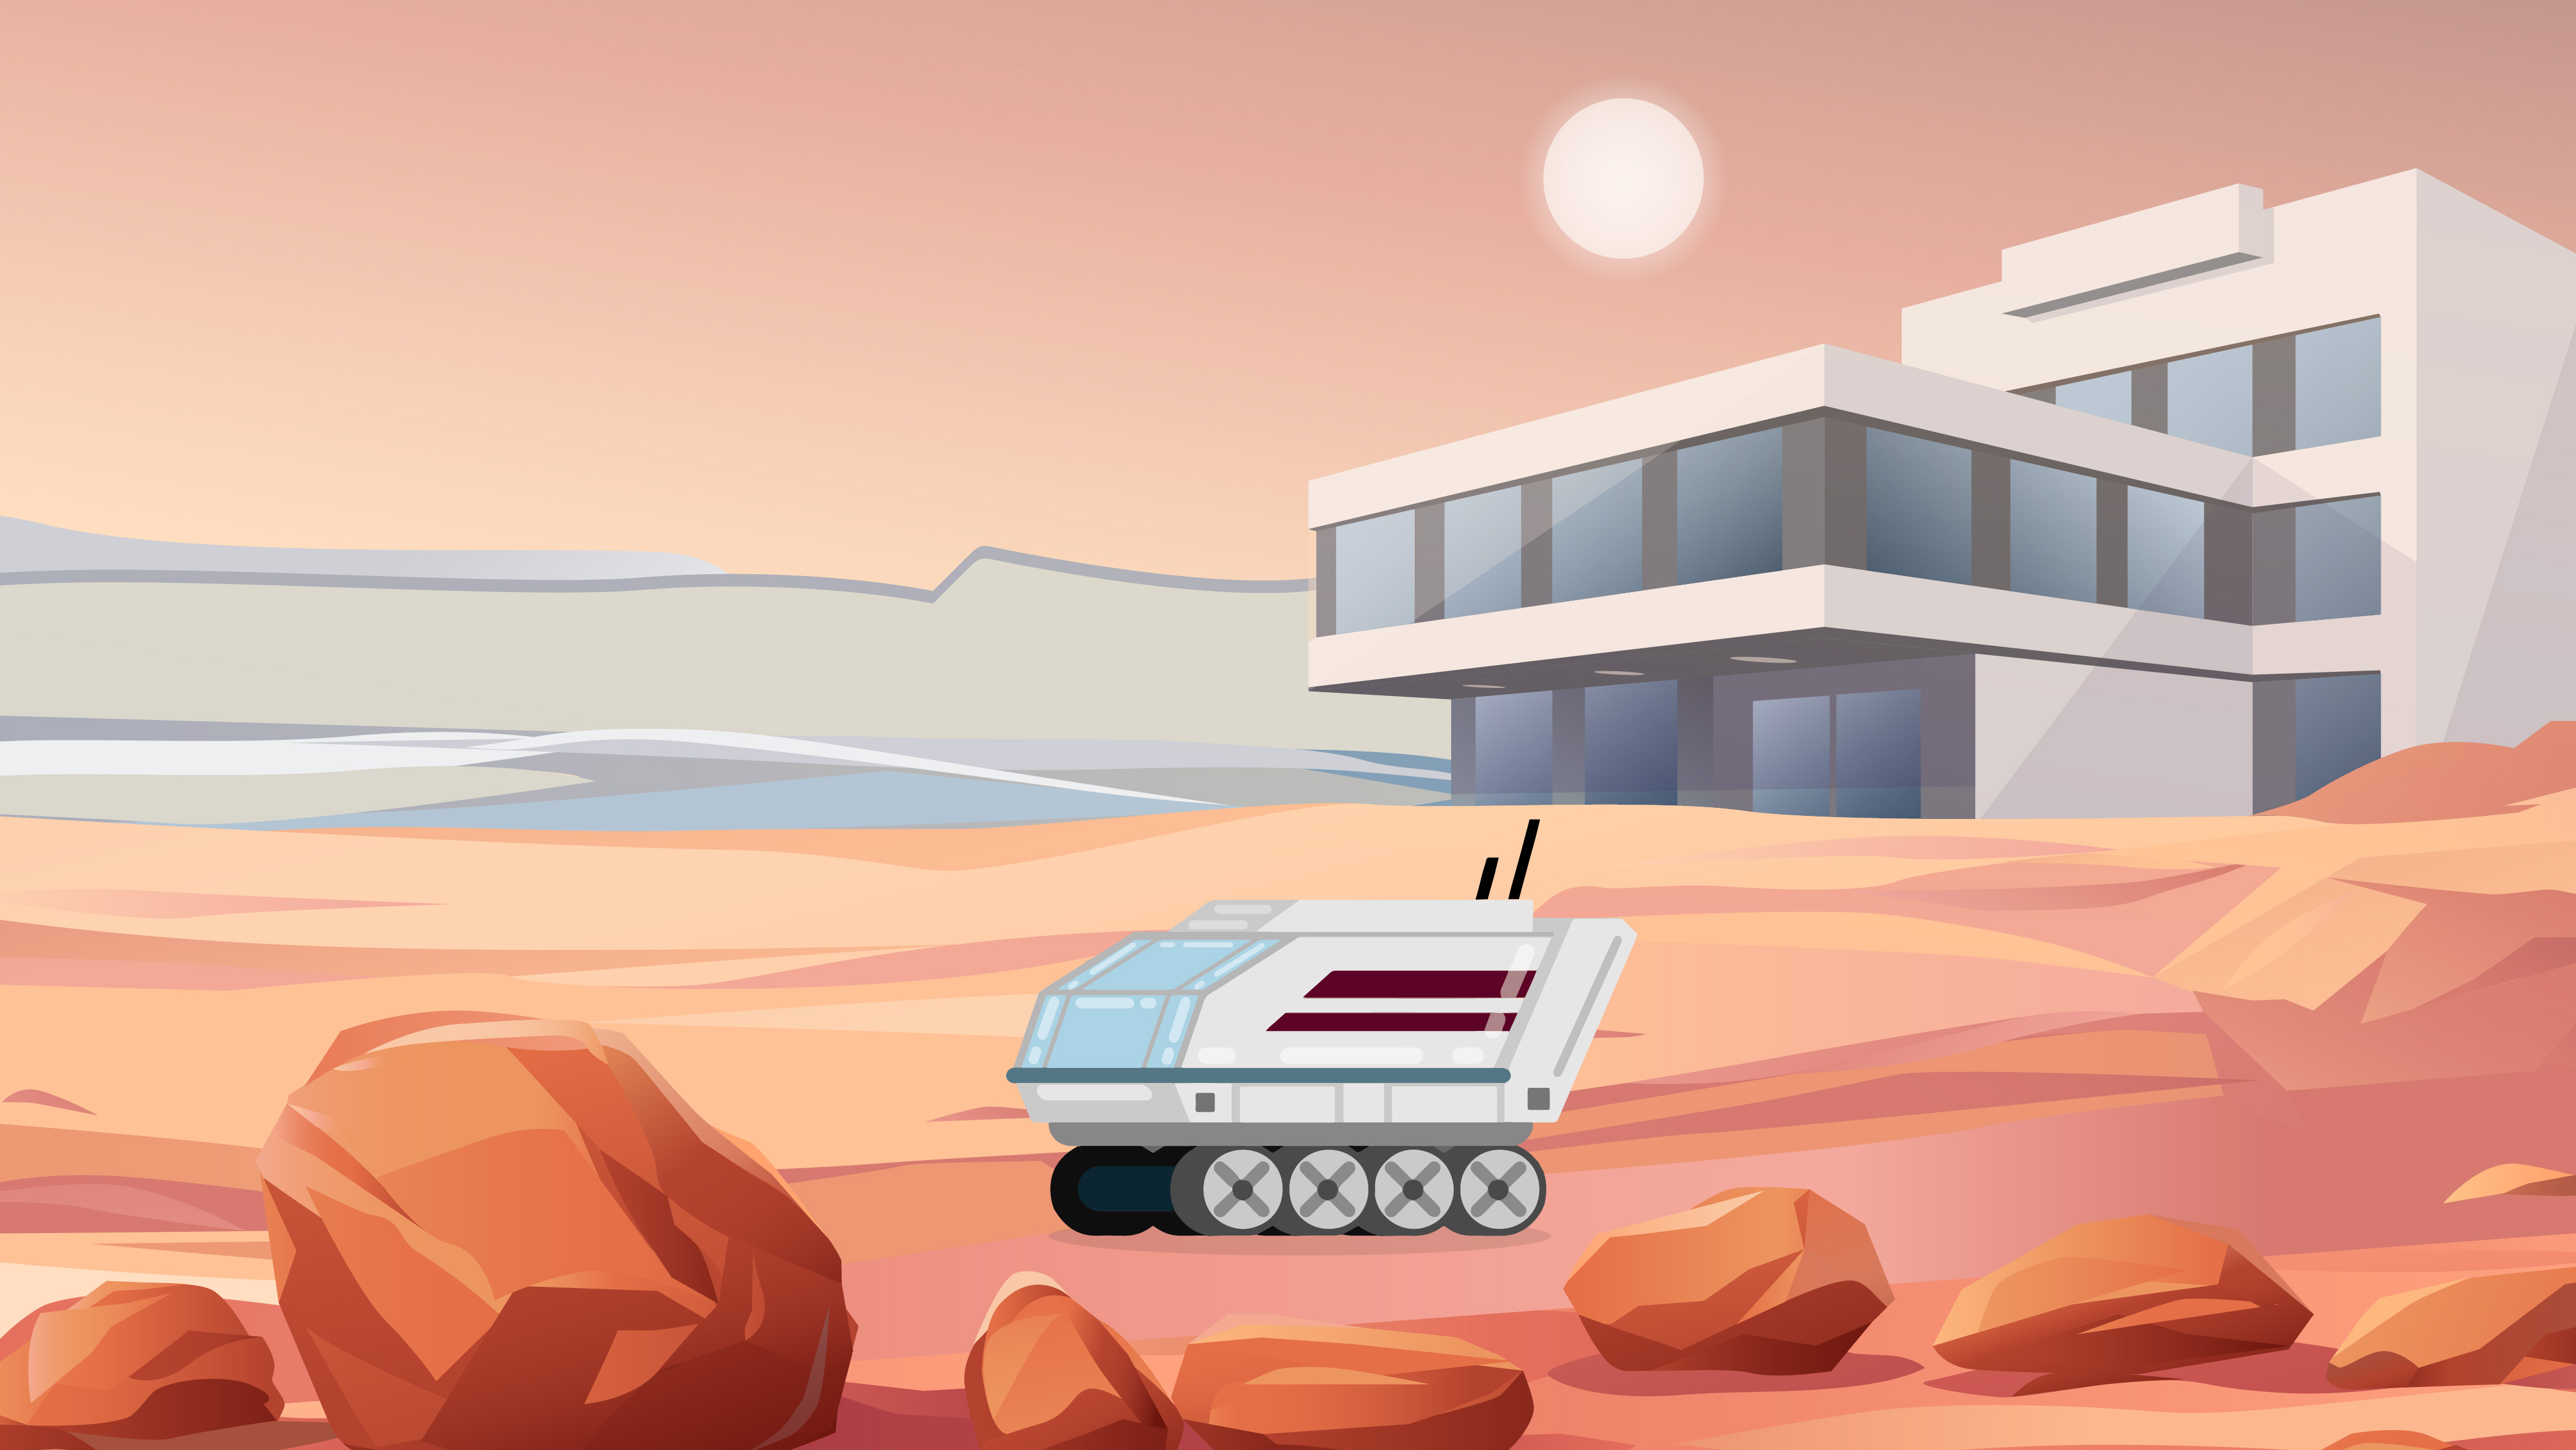 Illustration of a Mars Rover on martian soil in front of a building